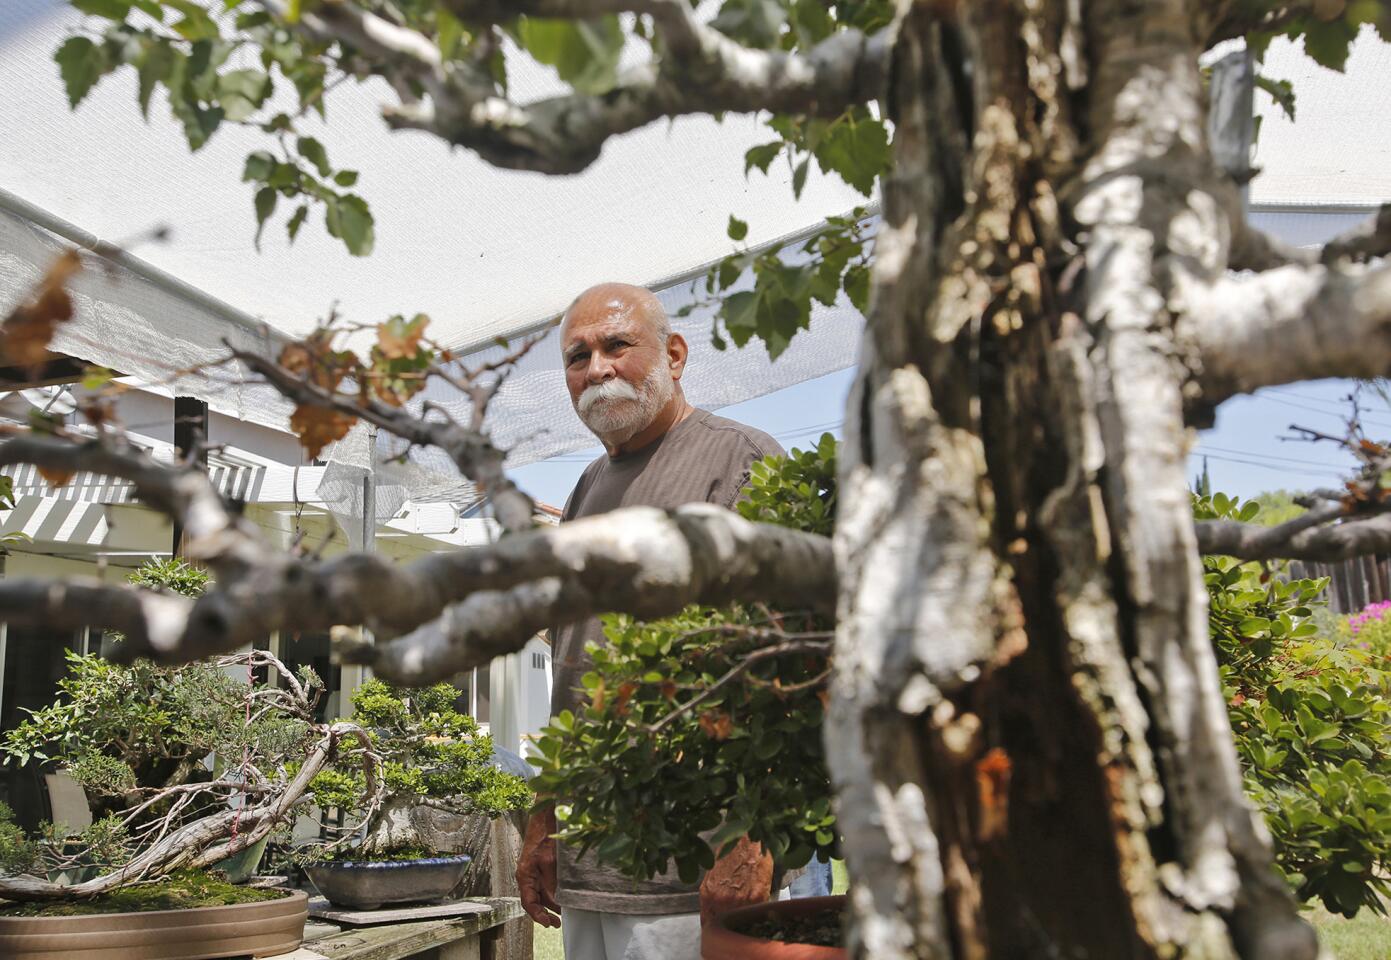 Manny Martinez walks past a red birch bonsai tree his backyard gallery on recent afternoon. The annual Bower's Museum Bonsai Tree exhibit opens soon in Santa Ana and will be curated by Martinez.